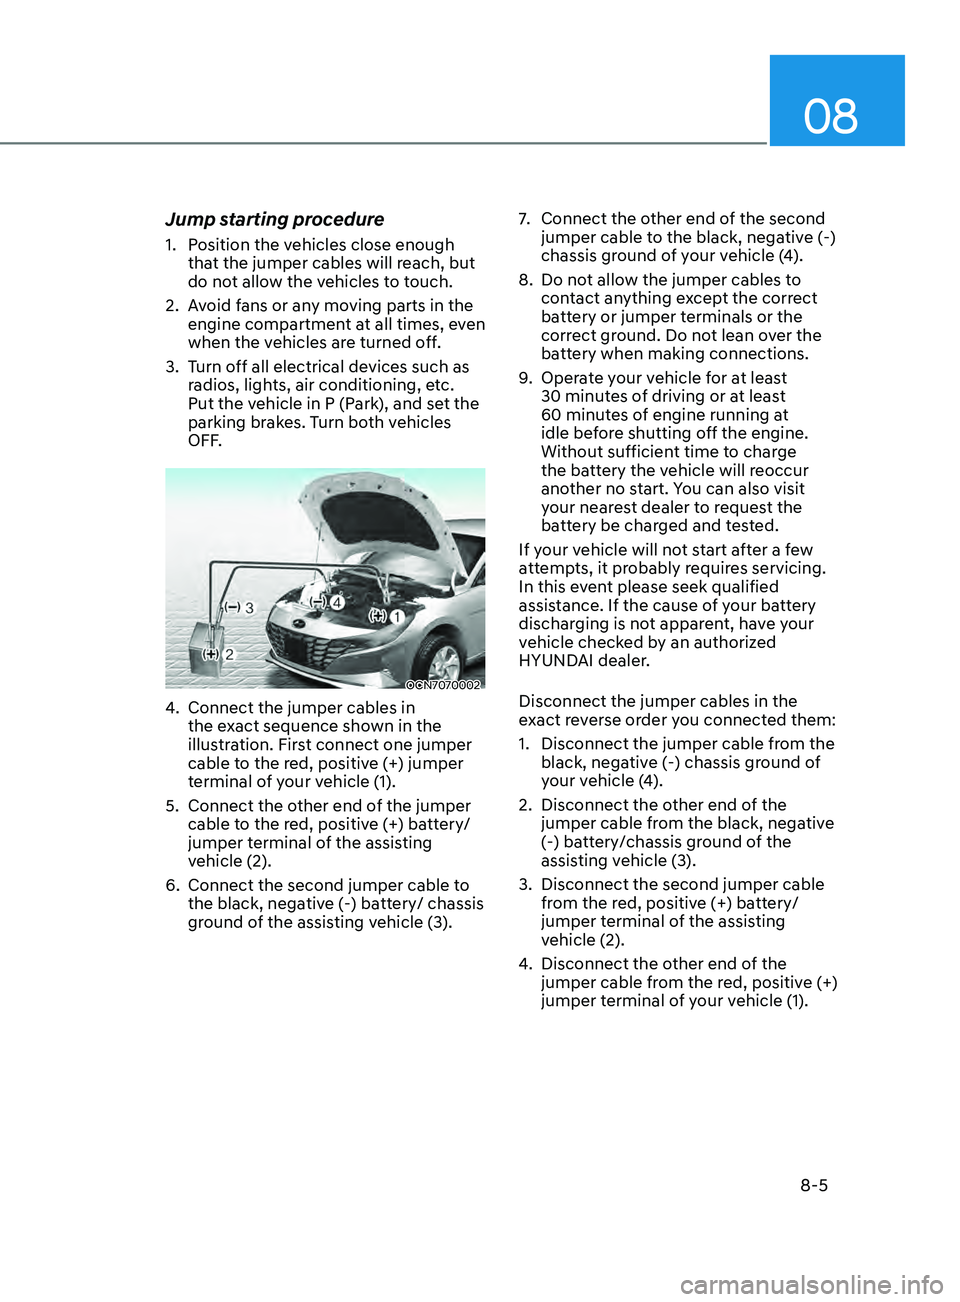 HYUNDAI ELANTRA 2021  Owners Manual 08
8-5
Jump starting procedure
1. Position the vehicles close enough 
that the jumper cables will reach, but 
do not allow the vehicles to touch.
2.
 Av

oid fans or any moving parts in the 
engine co